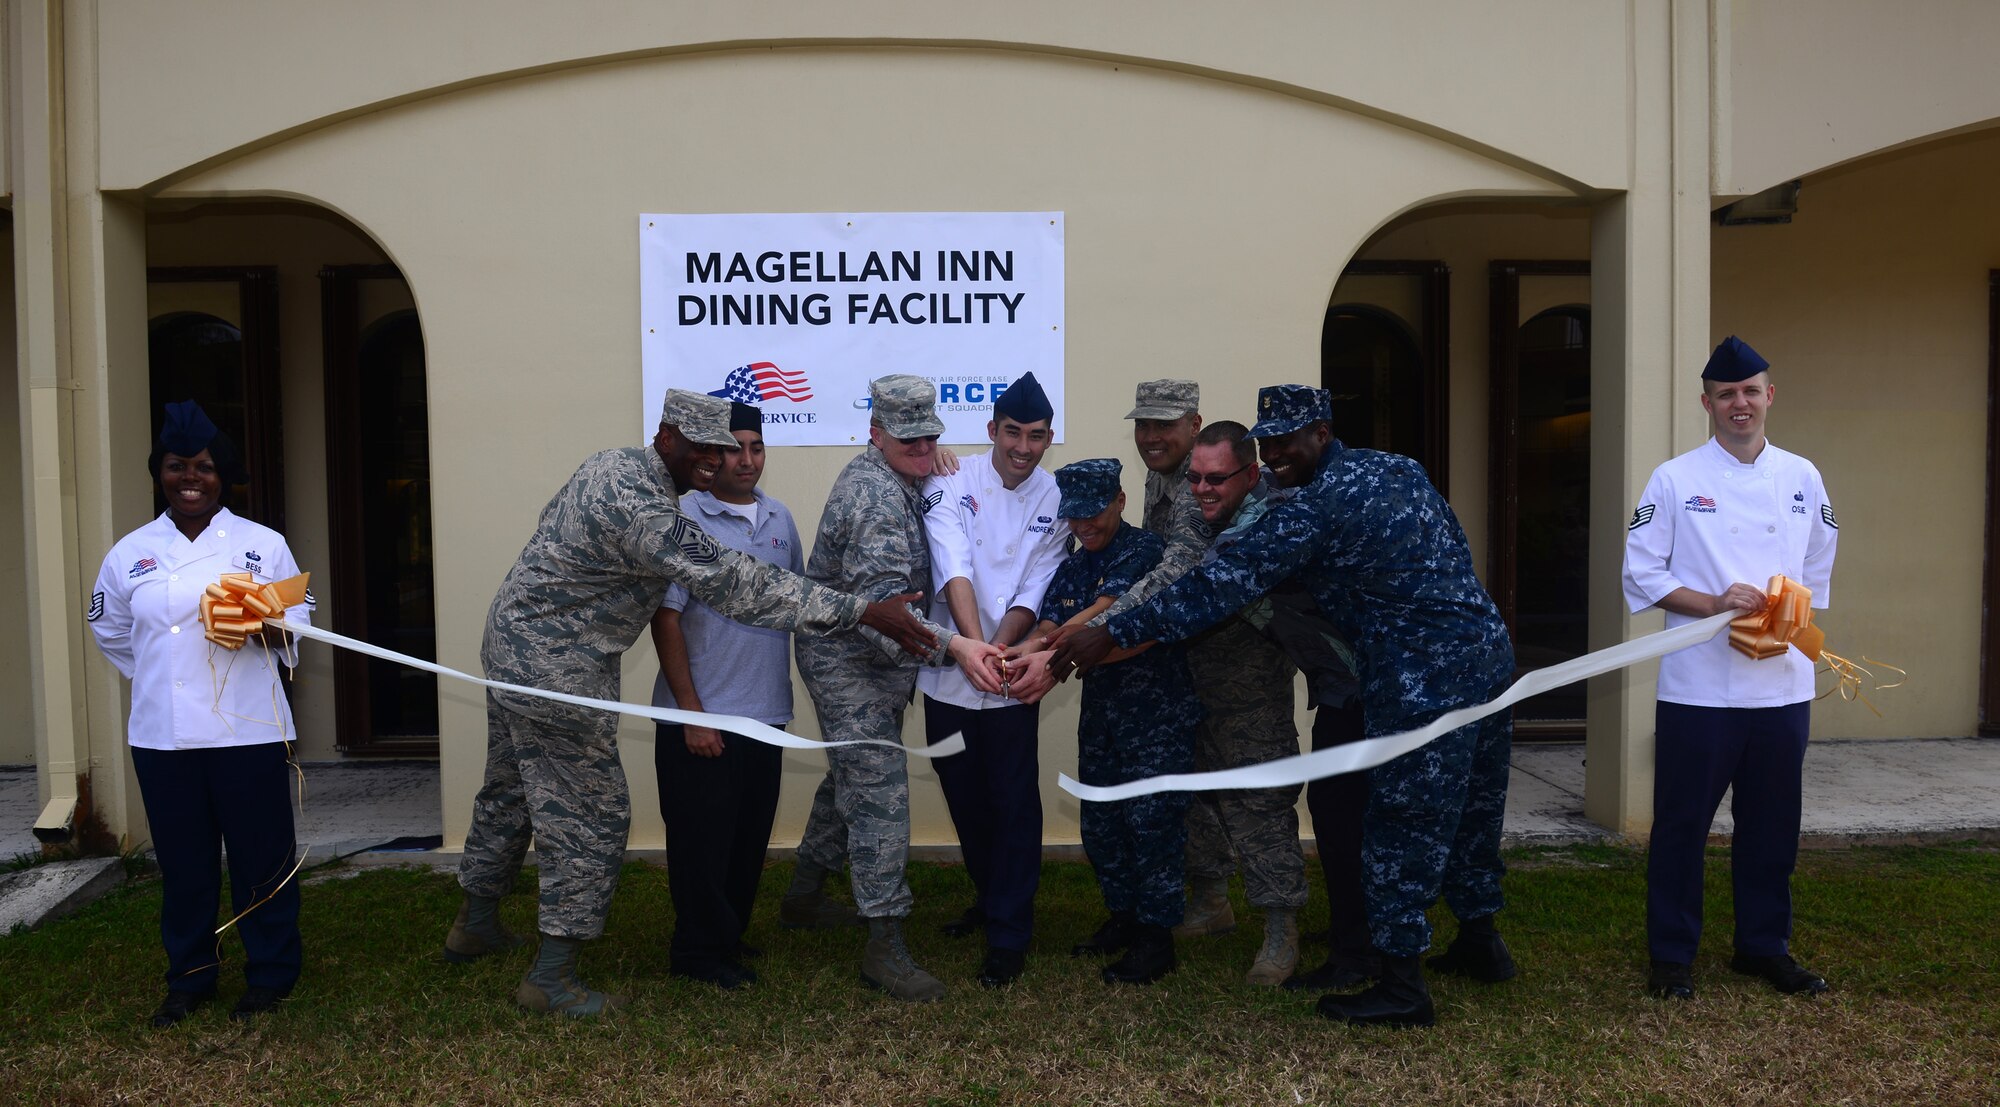 Joint Region Marianas leaders cut a ribbon to symbolize the opening of the Magellan Inn Dining Facility May 26, 2016, at Andersen Air Force Base, Guam. The remodeled dining facility offers improved serving lines, charging stations where customers can charge their electronic devices and more menu options for Airmen. (U.S. Air Force photo by Senior Airman Joshua Smoot)